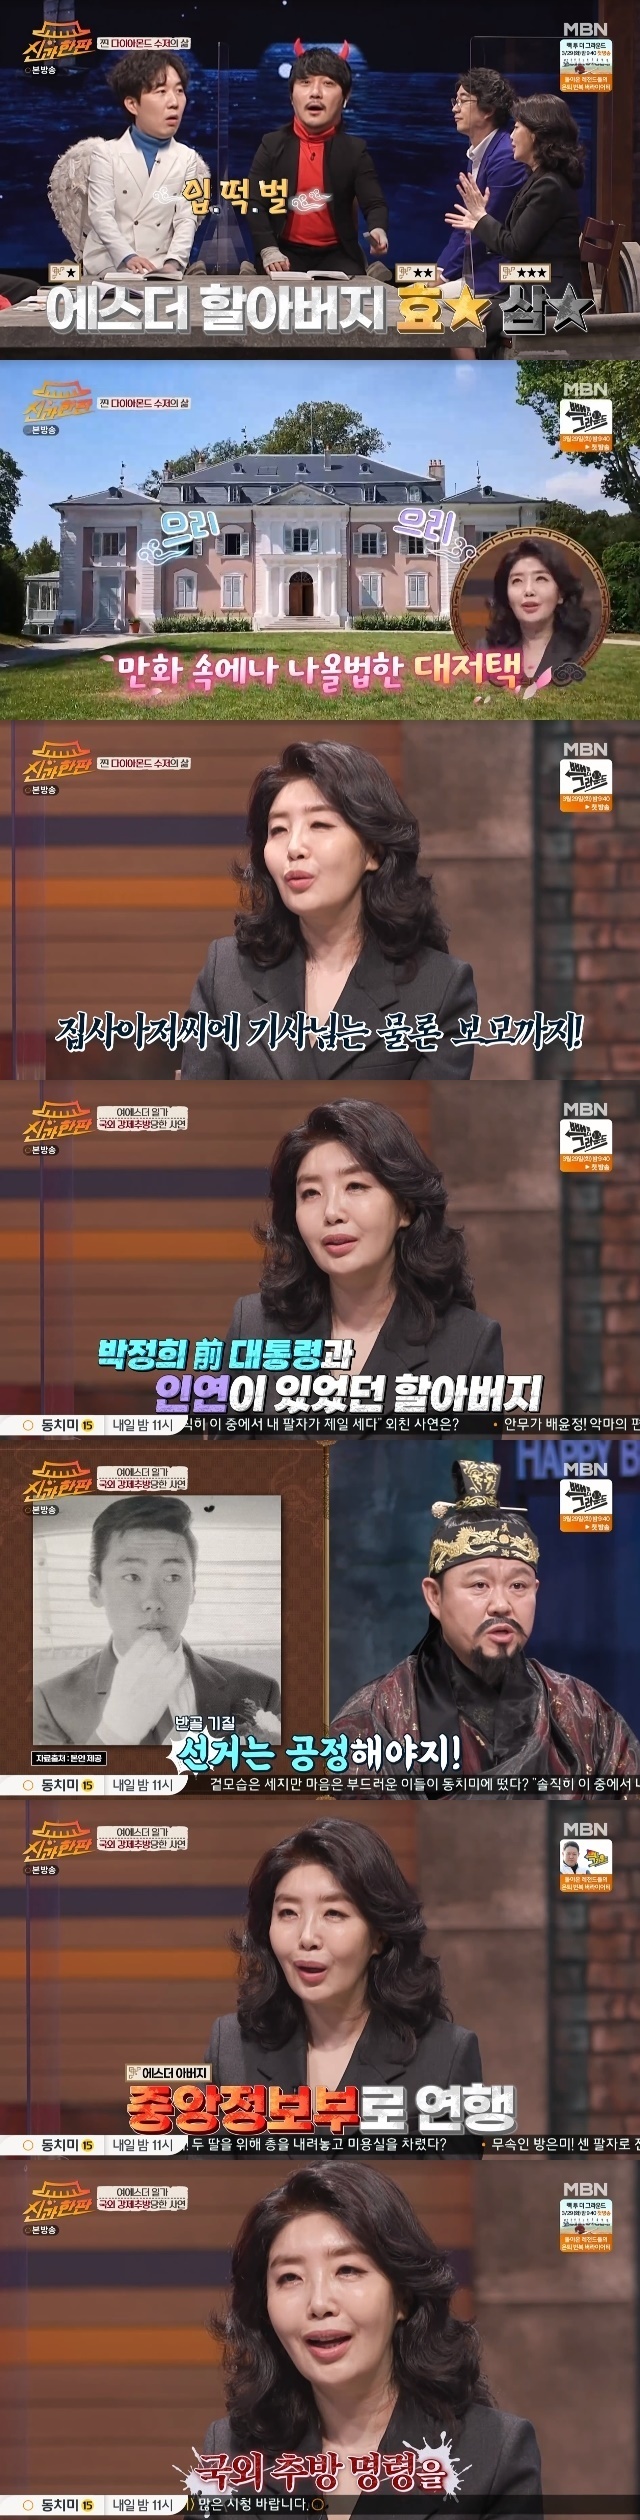 Yeo Esther has unveiled a family history that has been subjected to past politics Revanche.In the 9th MBN entertainment God and the Blind broadcast on March 25, Hong Hye-geol and Yeo Esther appeared as guests and played a hot talk.On this day, Yeo Esther and Hong Hye-geol were fortunate about the keyword Blood Diamond spoon that refers to their couple.Hong Hye-geol said that Yeo Esther was a Blood Diamond spoon in the past, I did not know when I first started dating, but I was curious about it after about a fortnight.I asked the same doctor what he was like. He said Blood Diamond spoon.At that time, my friend said that there is a Deagu single-family house, and Madang is 800 pyeong, and there is a pond. Yeo Esther confessed, My grandfather bought the Deagu Ilbo press company in Deagu and started Cheil Industries with the late Lee Byeol-cheol (former Samsung Saju).Asked about his specific life, he said, I will just talk about it as it is.The entrance was opened in a very high iron gate like a beautiful and beastly iron gate, and there was a house and a house.There are people who only sew and sew in the house, and there are a couple of knights in the butler who cares for the house, and there was a nanny who raised us. Its a long way from the food-eating space to the kitchen.My mother sits still and says to my father, If you want to have lunch today, she will eat noodles. Then the next lady will go out and open the kitchen door and open the noodles.We had to sit on time. We could not go to Friends house on time, and the knight took us to school and waited when it was over. Kim Gulra responded to this Yeo Esther by saying, It is similar to the feeling of a chaebol who often knows. Do Kyung-wan asked whether TK was a heart of conservatism.Yeo Esther said, My grandfather is especially close to the late President Park Chung-hee, and Park Chung-hee, and when Mrs.Then, during the 7th presidential election in 1071, the late President Kim Dae-jung came to Deagu for a campaign, when TK did not take any media coverage of the late President Kim Dae-jung.My father was the planning director of the Deagu Ilbo.My grandfather is close to the late President Park Chung-hee, but my father has a semi-degenerative temperament and printed with Friends during the night.Since then, the Deagu Ilbo has been filled with propaganda, and the Central Intelligence Agency, the predecessor of the Ministry of Justice, has taken his father. He was so surprised that he went to Cheong Wa Dae and tried to meet President Park Chung-hee.Yeo Esther said that it would have caused a huge tax burden, saying, All businesses that have gone to the Asset Management Corporation except one, and I was able to return to Korea when my grandfather died of stomach cancer because I could not get my foot on my grandfather until my grandfather died.